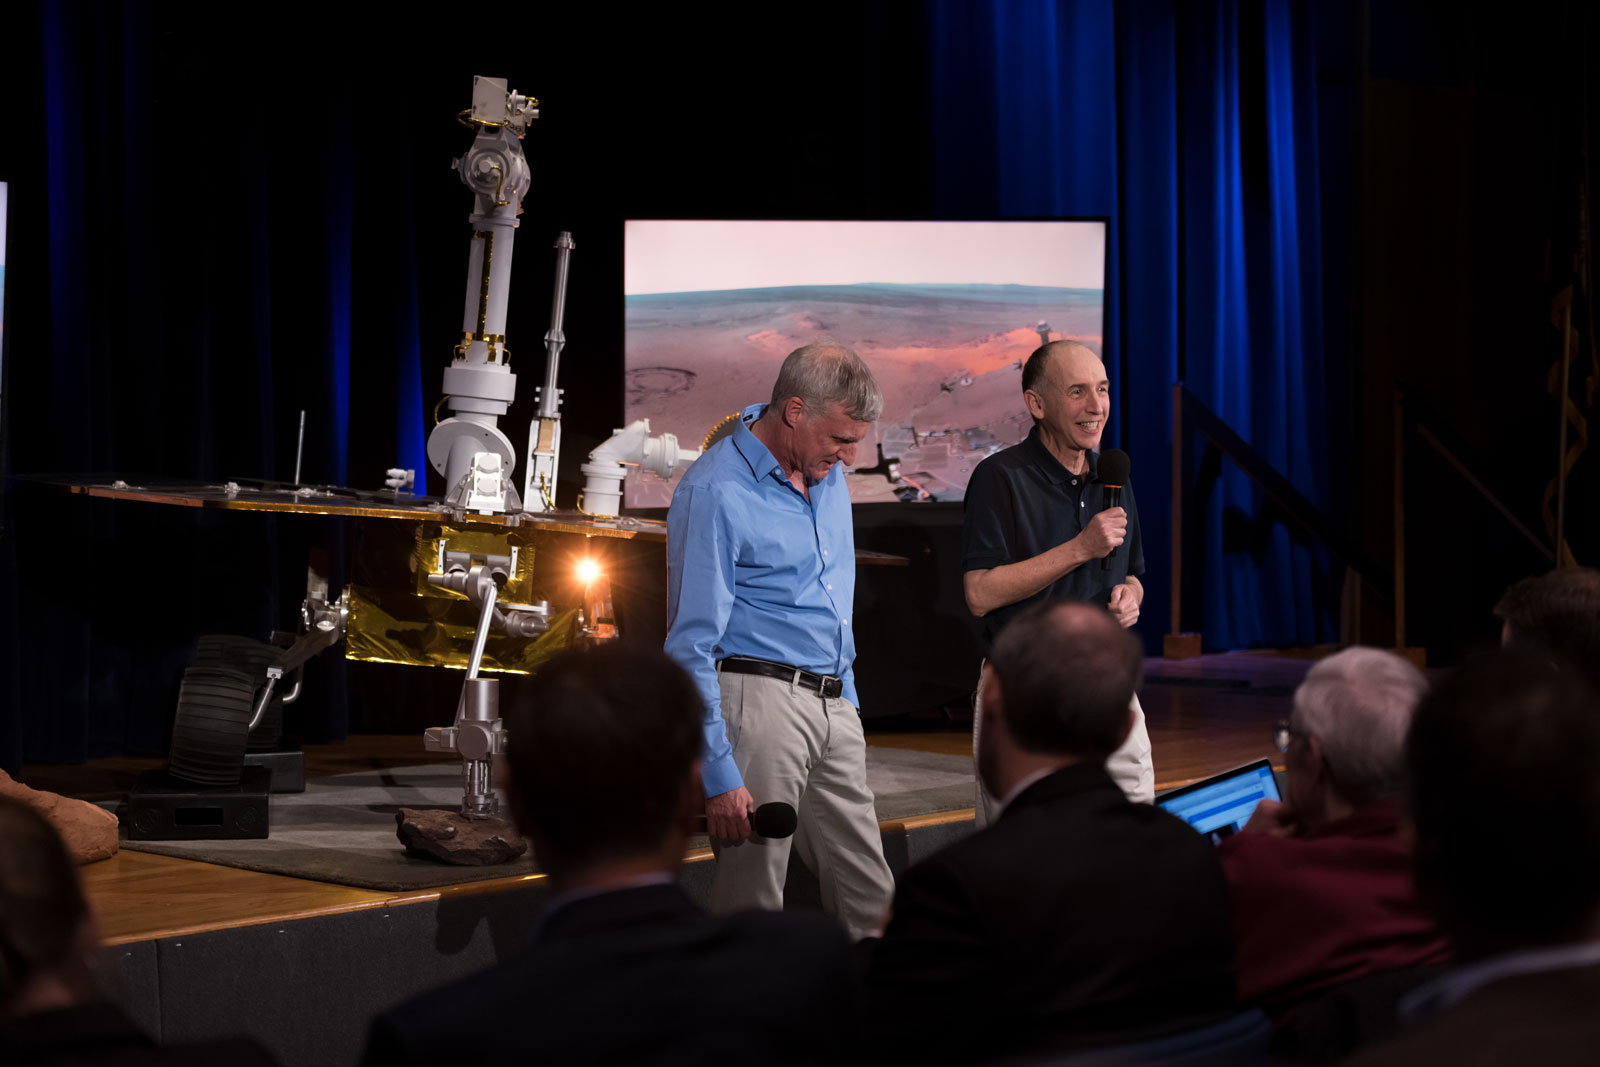 Steve Squyres, principal investigator for NASA’s Mars Exploration Rover mission, and Matt Golombek, the mission’s project scientist, discussed the ground-breaking science returned by the mission’s twin rovers, Spirit and Opportunity, on Feb. 13, 2019.